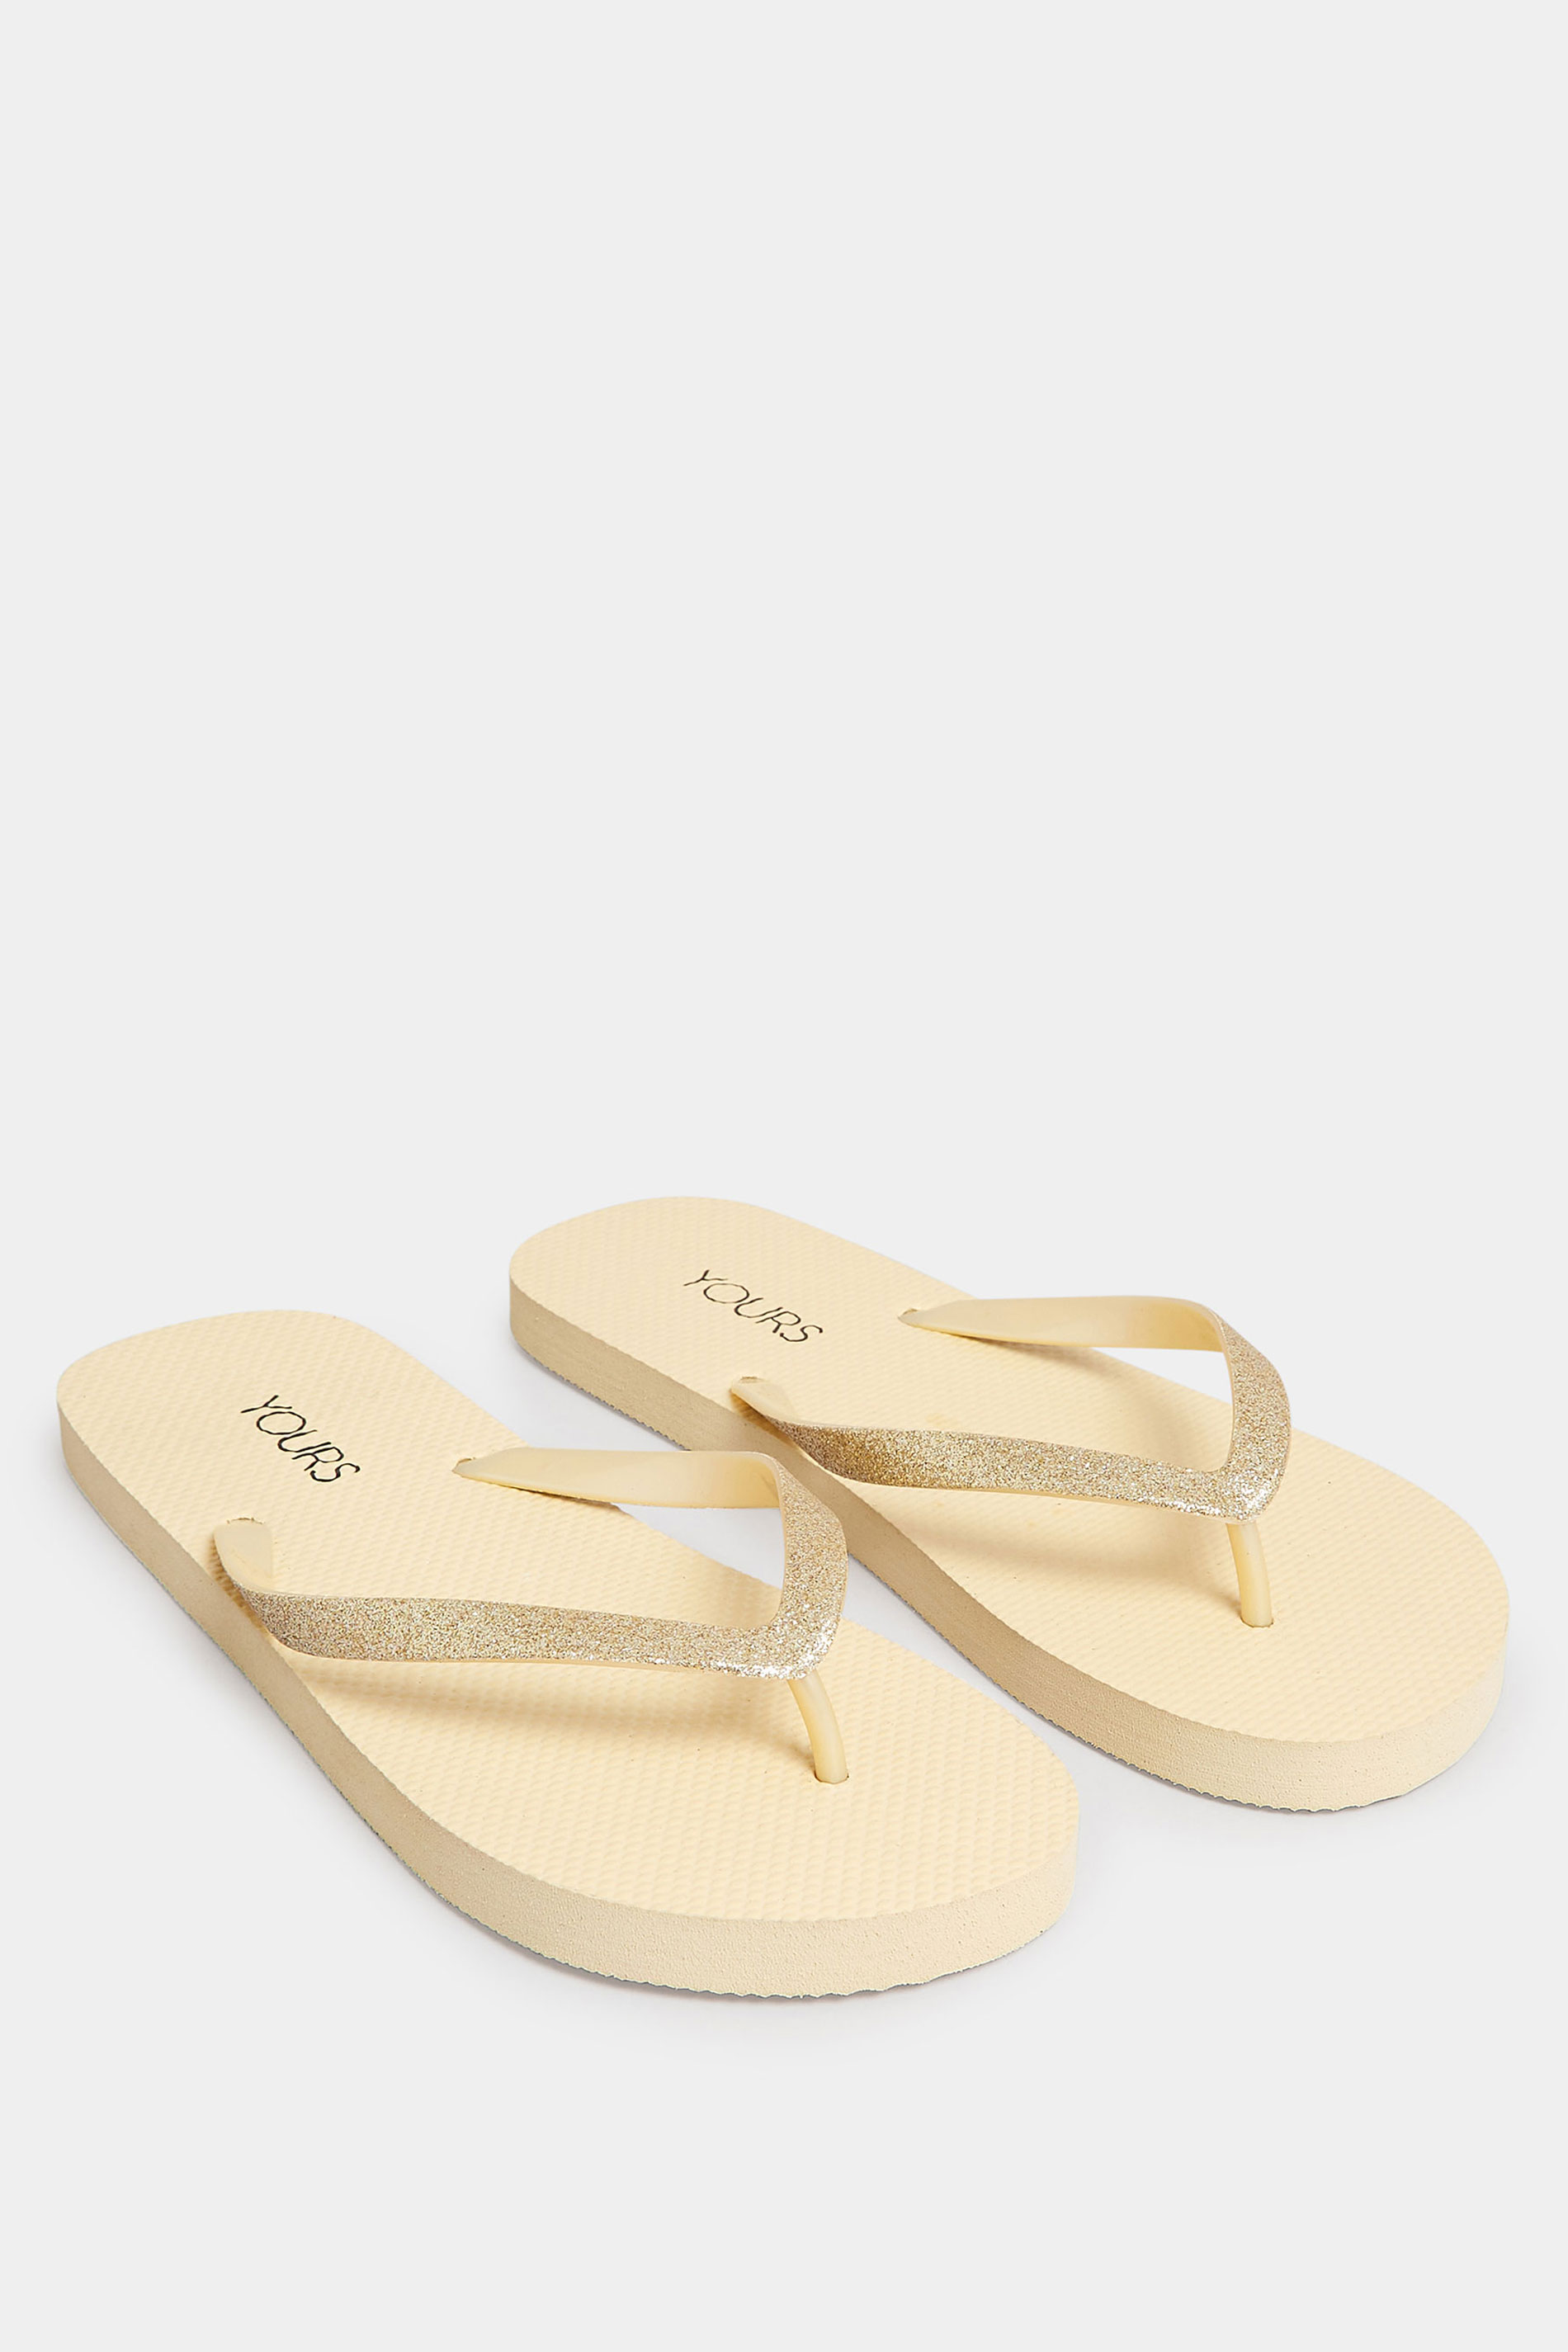 Gold Toe Thong Flip Flops In Extra Wide EEE Fit | Yours Clothing 2